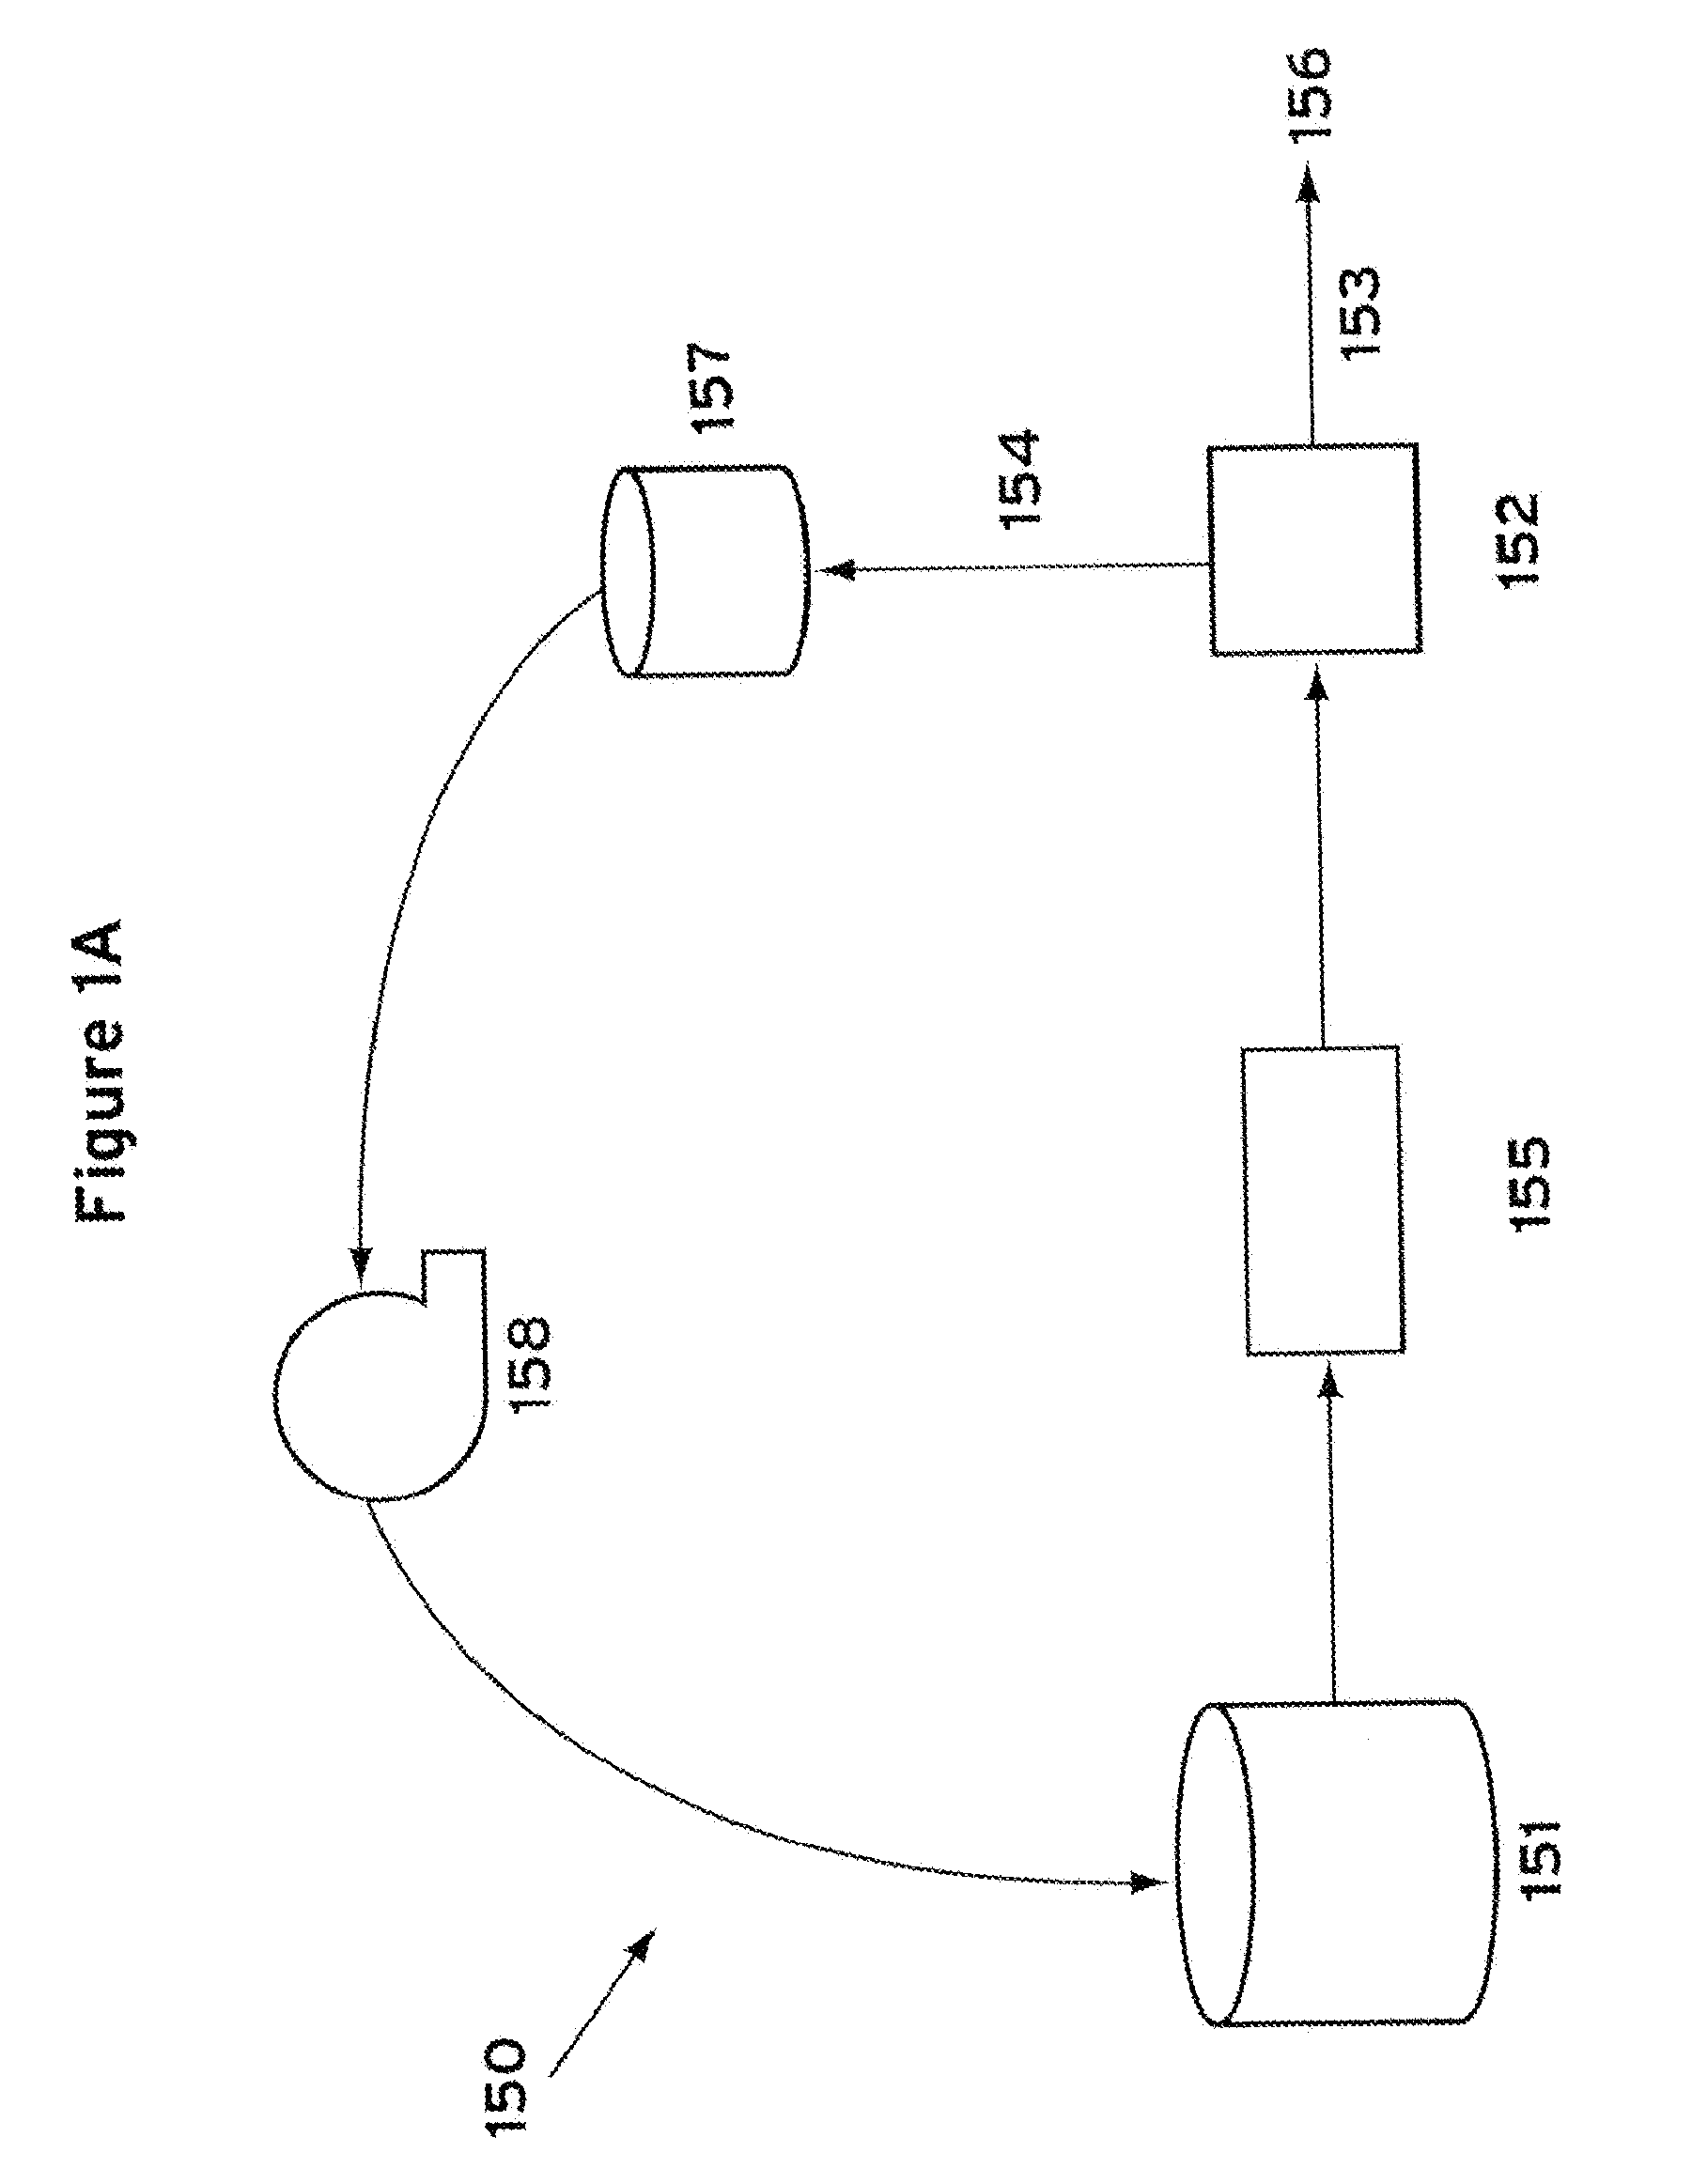 Apparatus and method for providing hydrogen at a high pressure